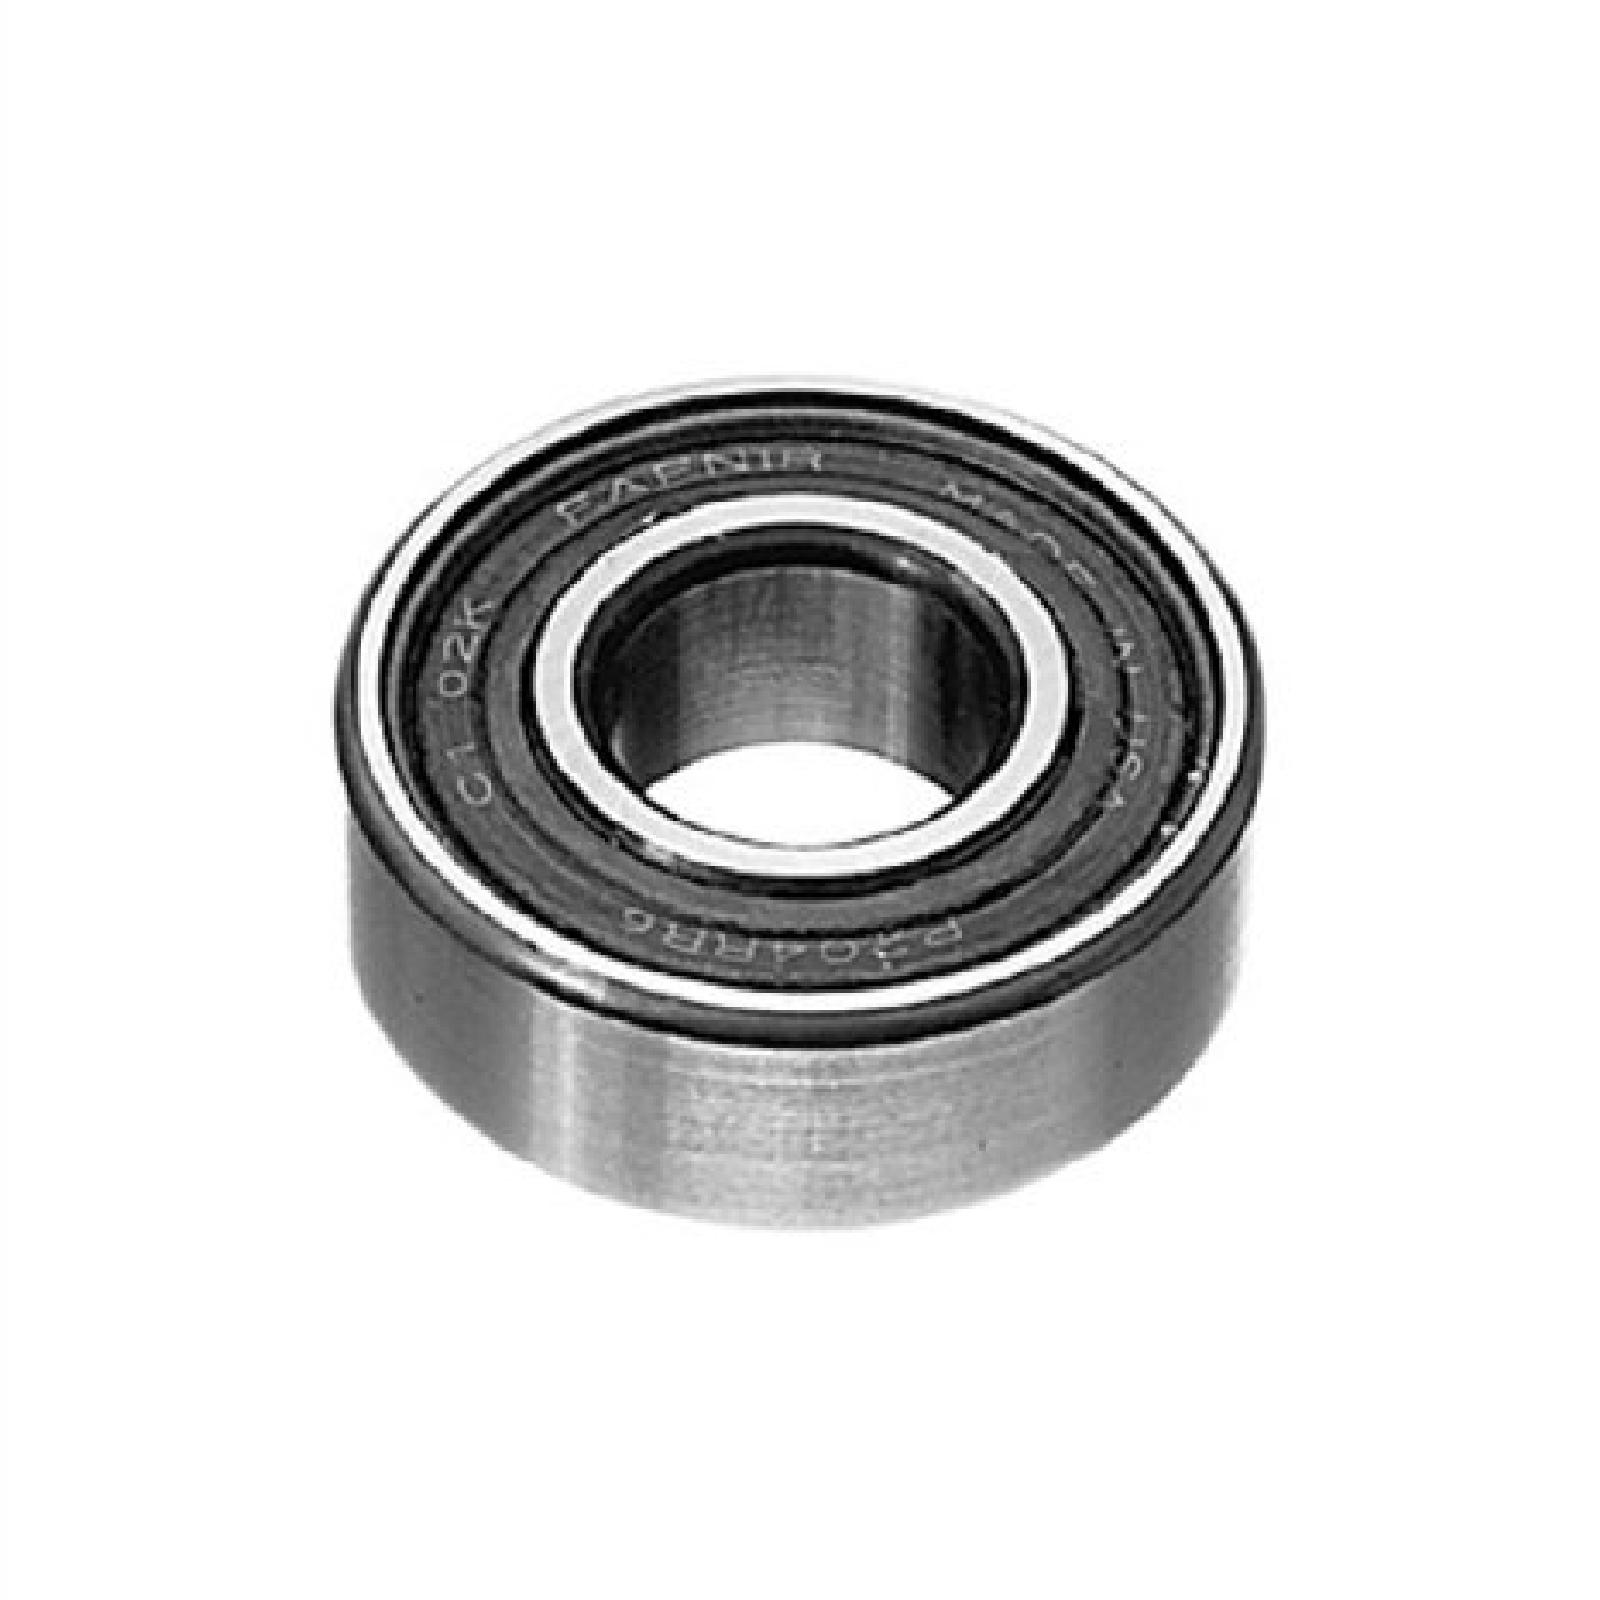 BEARING, BALL MAGNUM 6304 part# 45-245 by Oregon